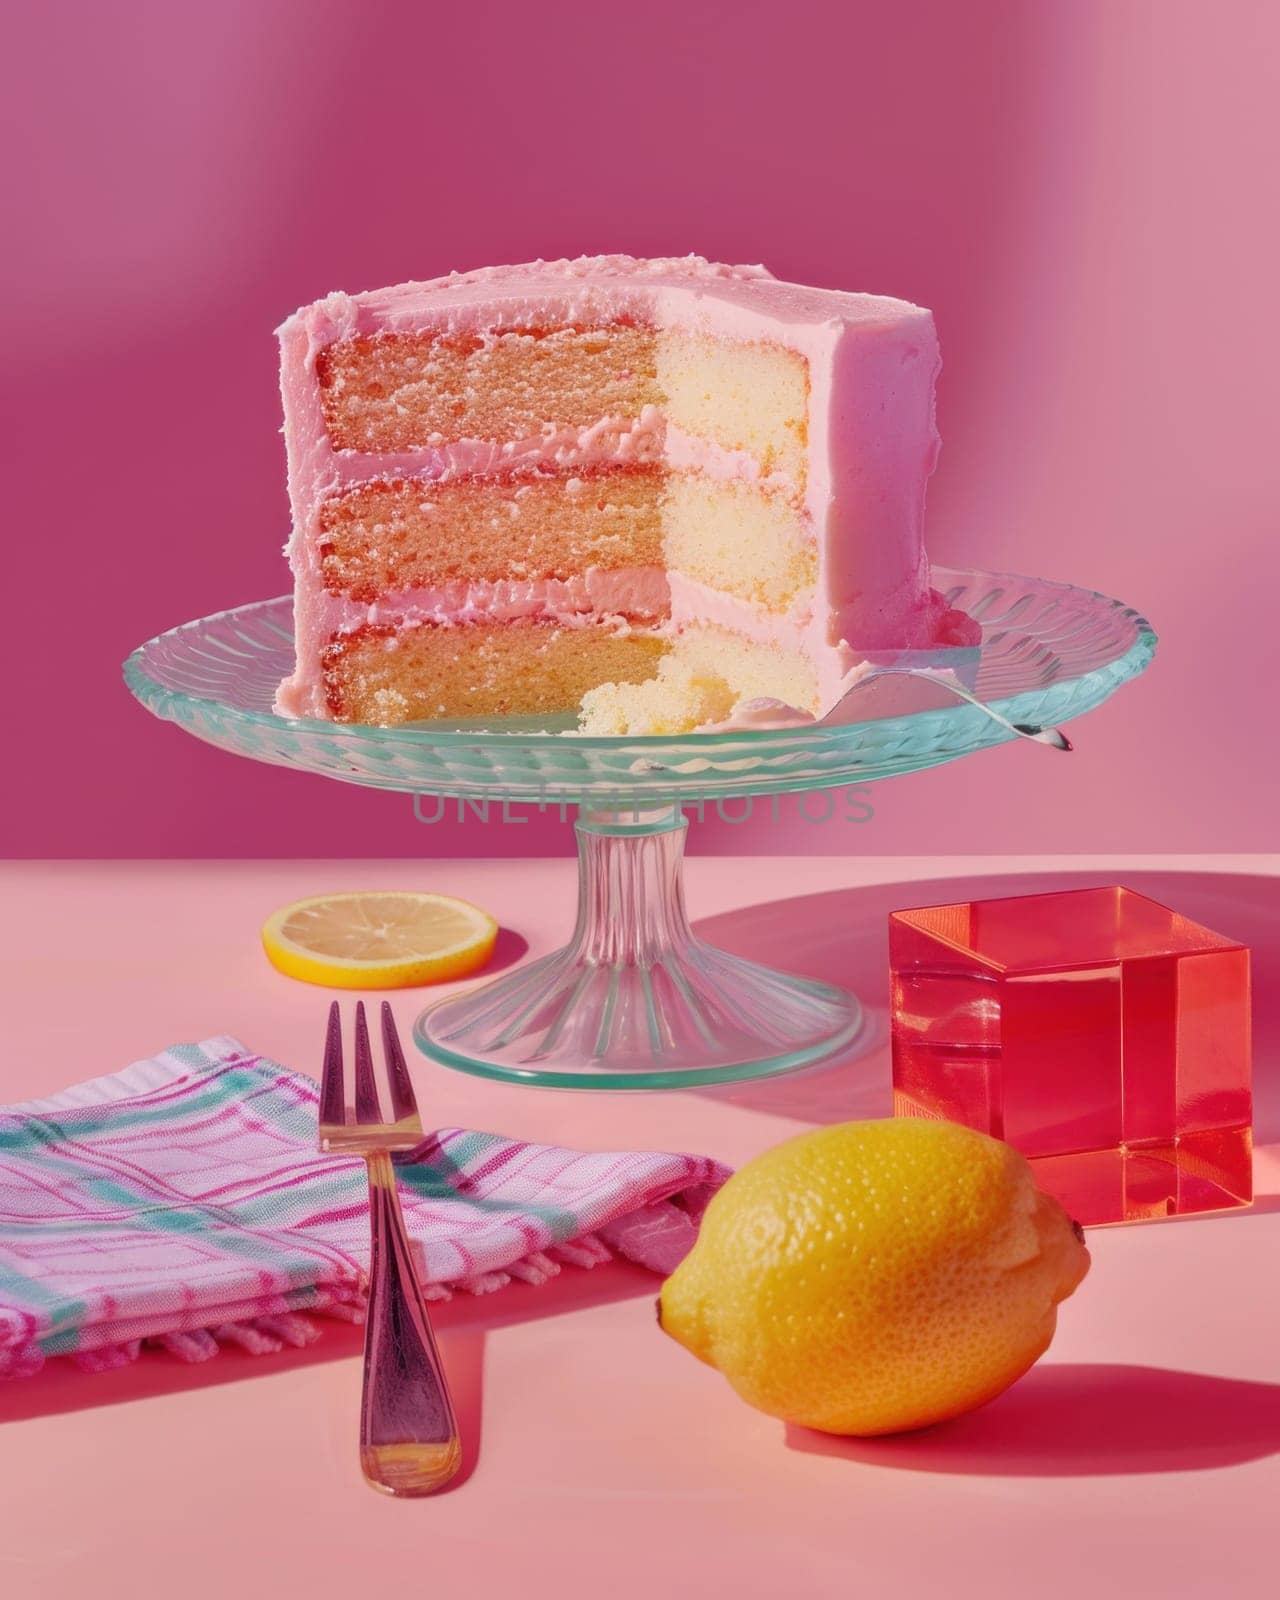 Sweet indulgence slice of pink cake on cake stand with lemon dessert, food, sweet, celebration, delicious, bakery, treat, party, event, pink